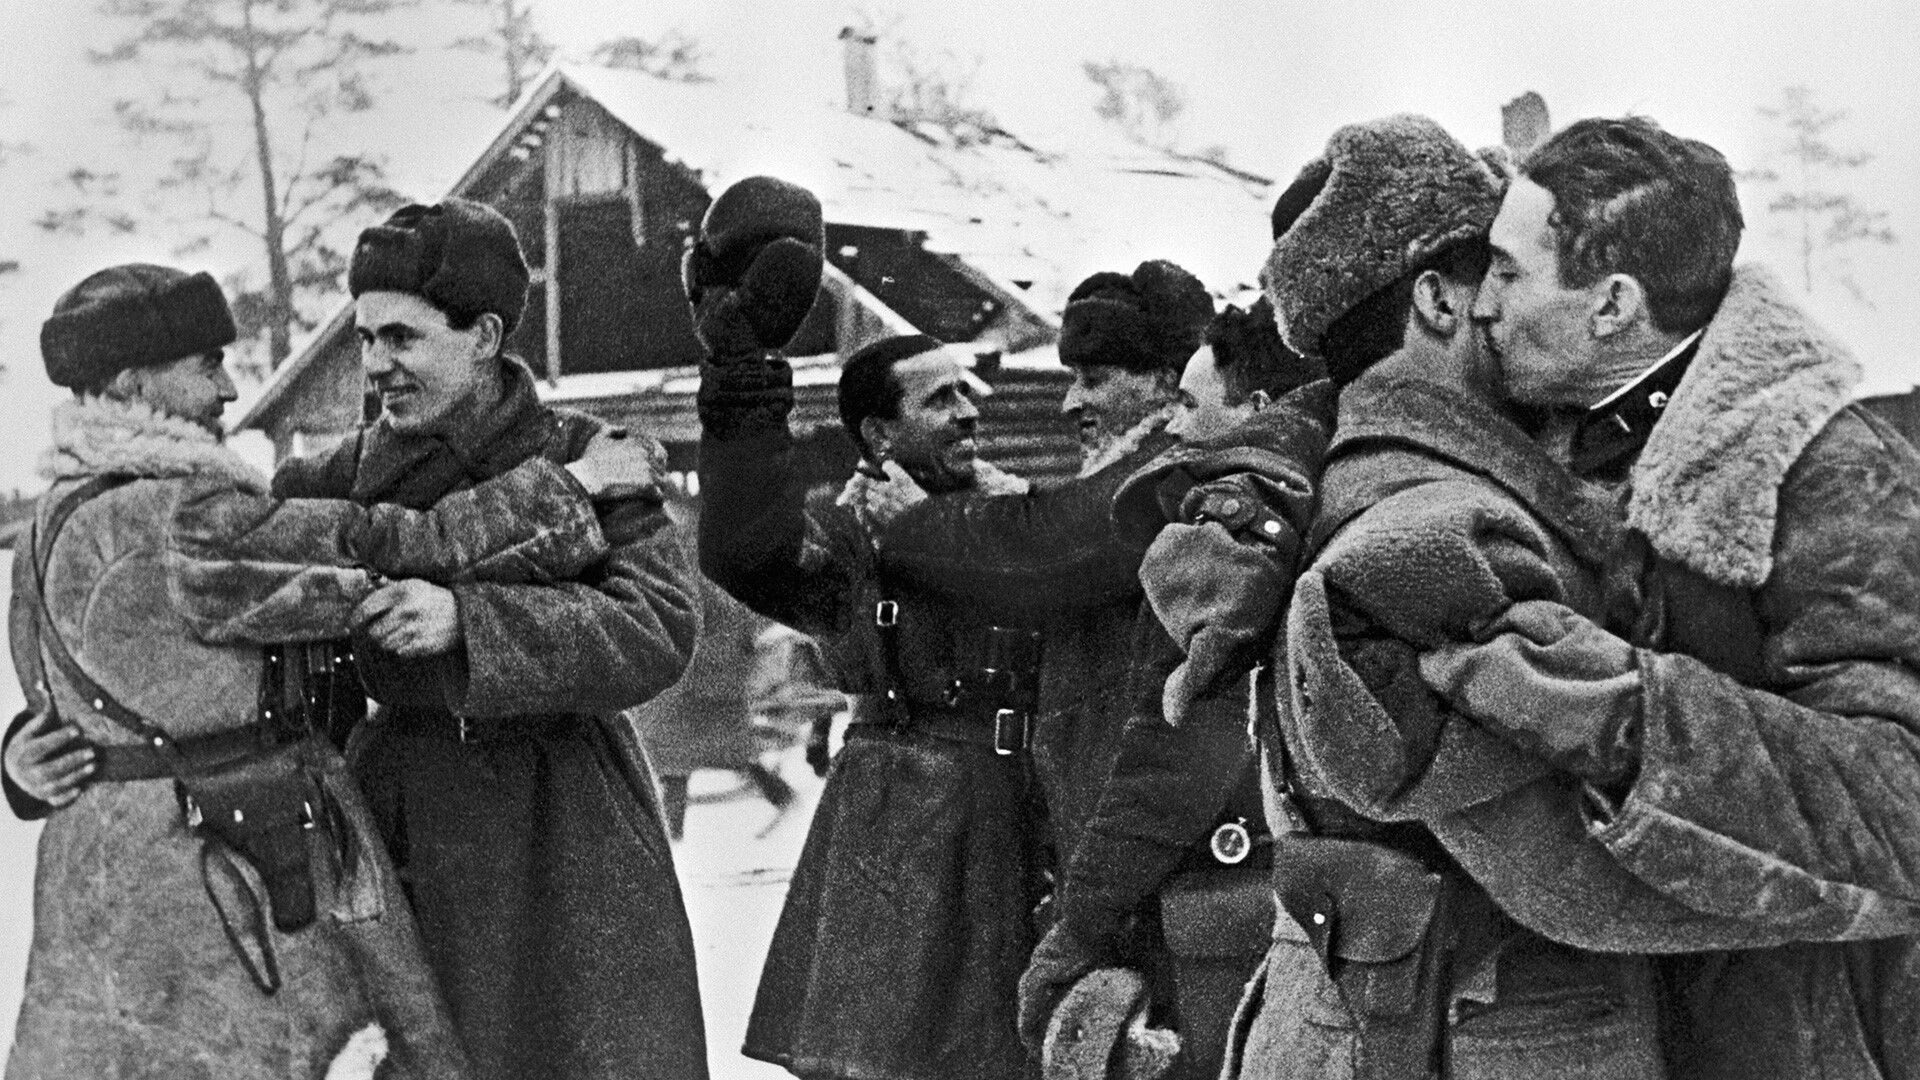 Soldiers of Leningrad and Volkhov Fronts greeting each other after breaking the blockade on Jan. 18, 1943.